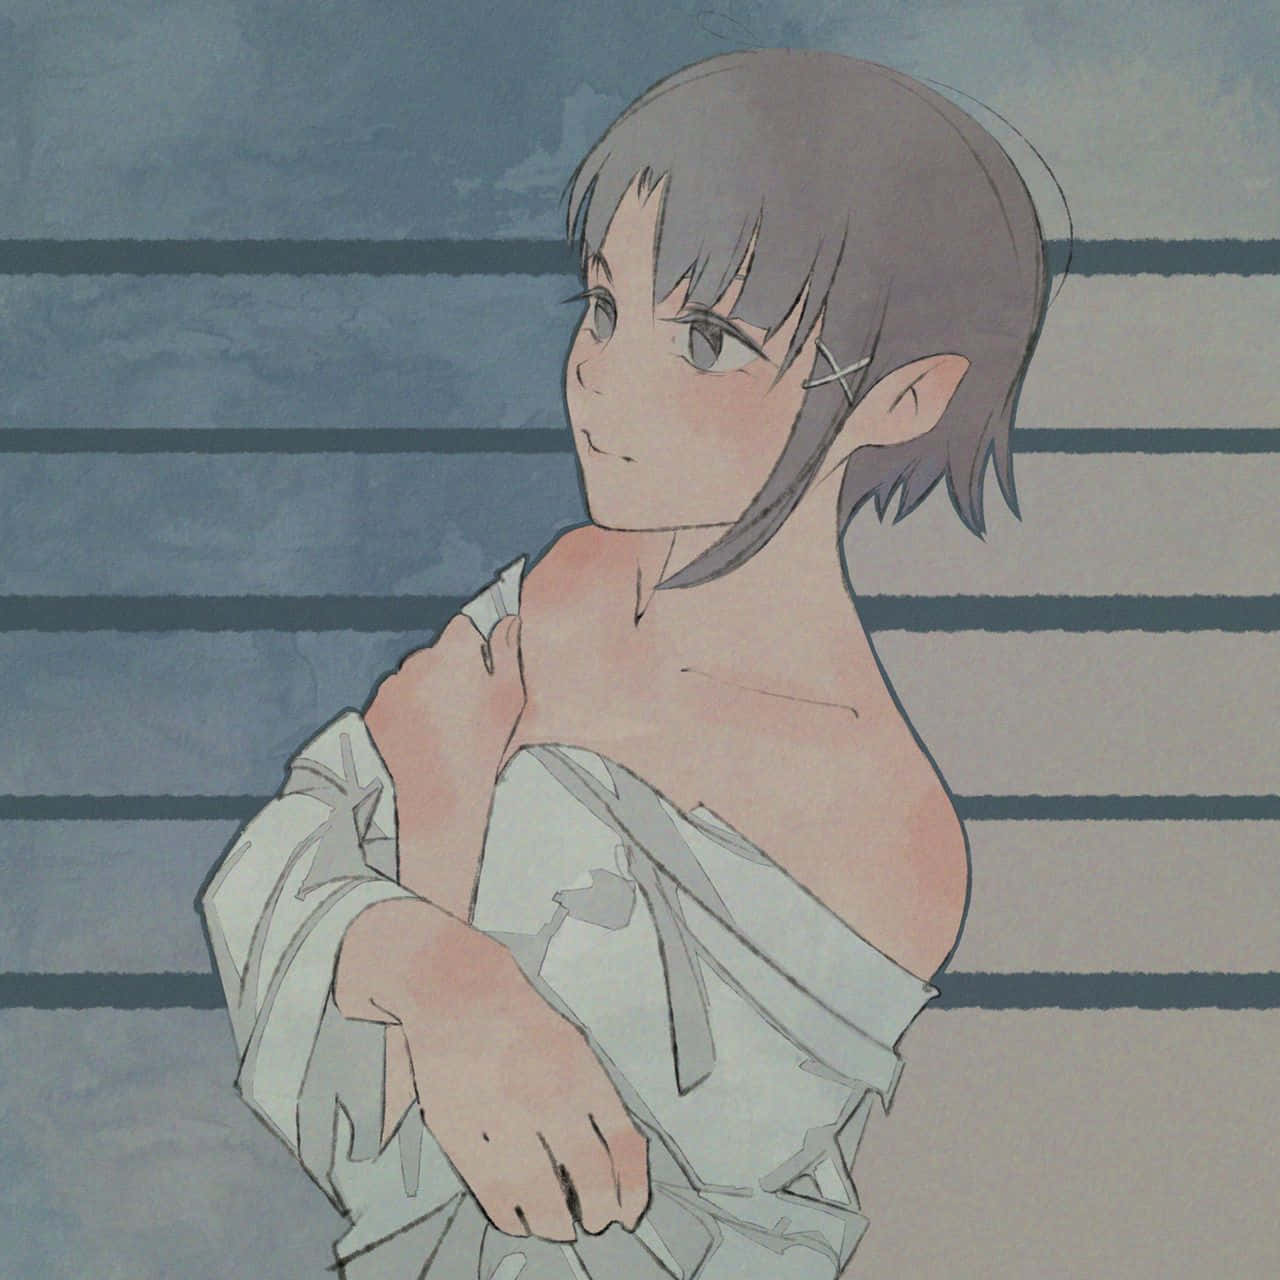 Serial Experiments Lain, an anime based on the concept of cyber-existence Wallpaper